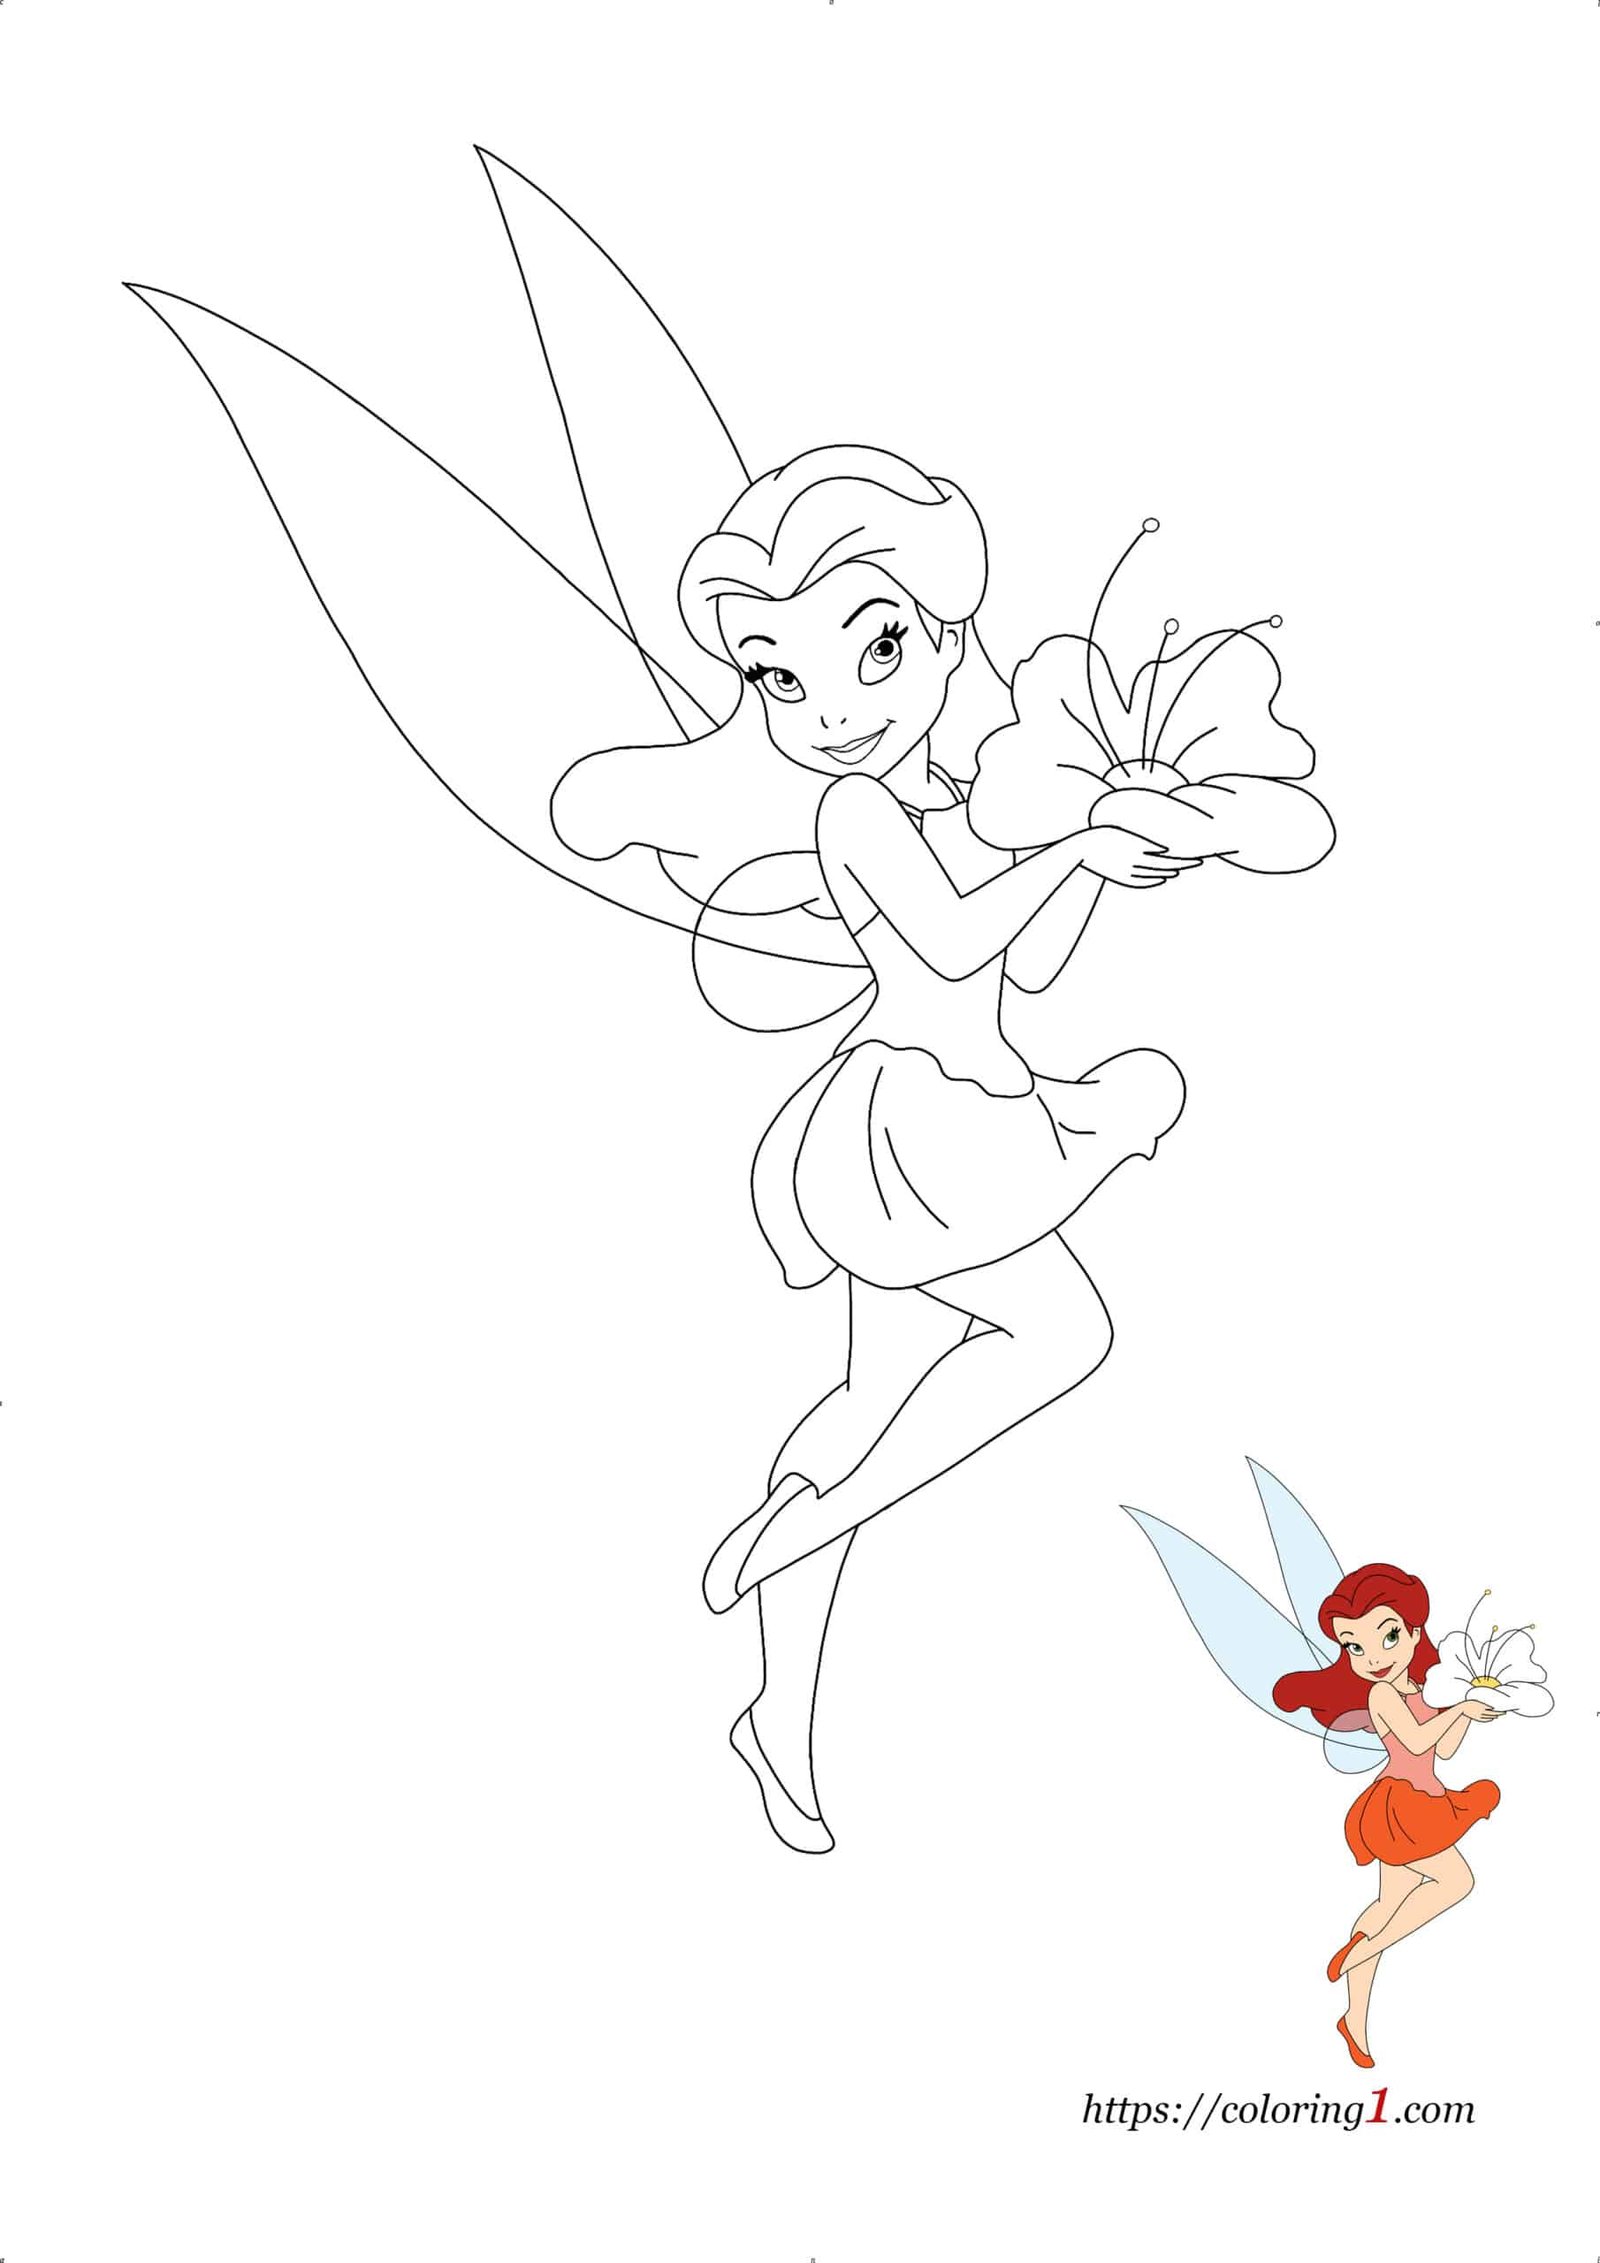 Flower Fairy magic coloring page to print